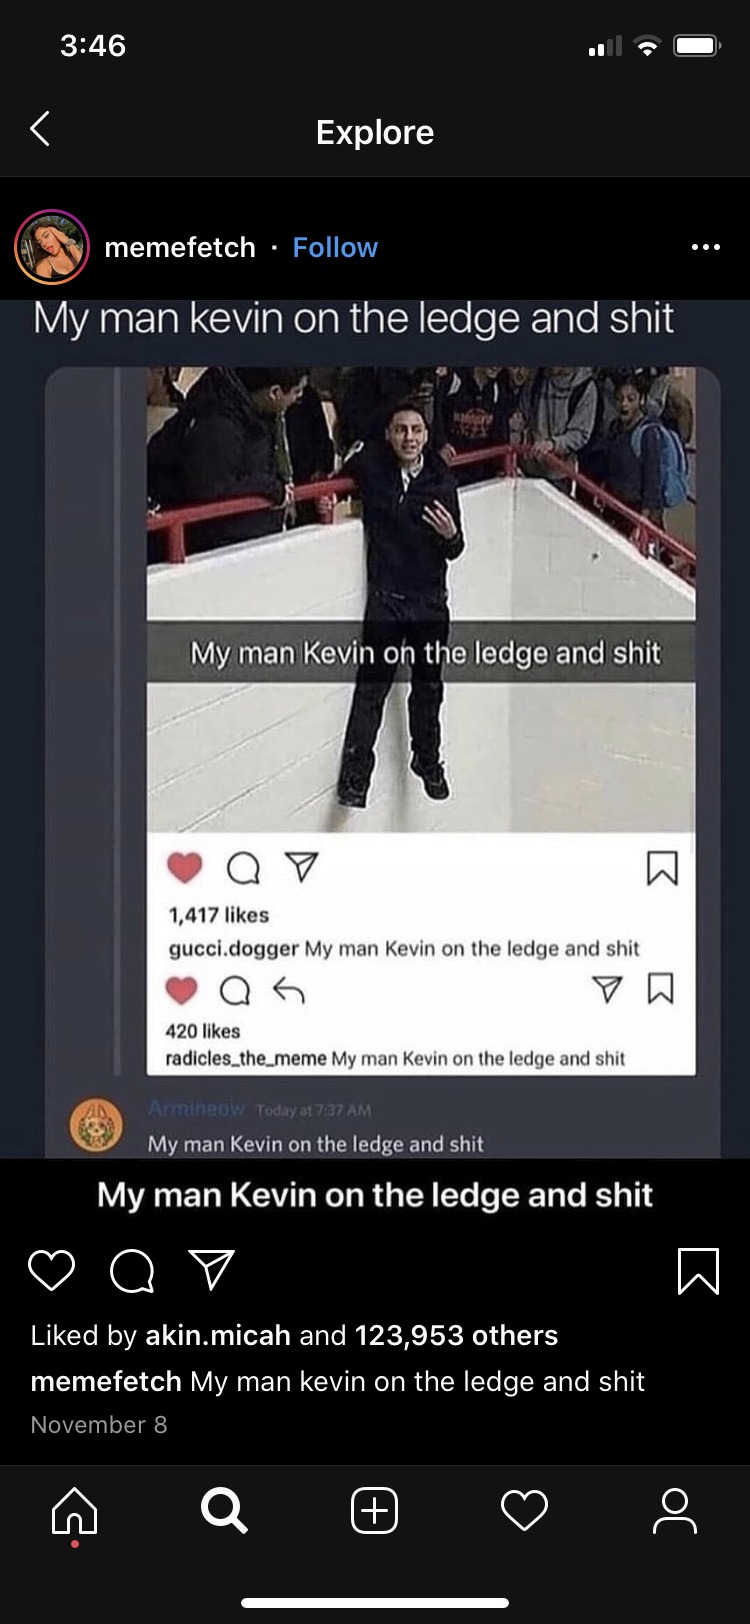 my man kevin on the ledge and shit - meme